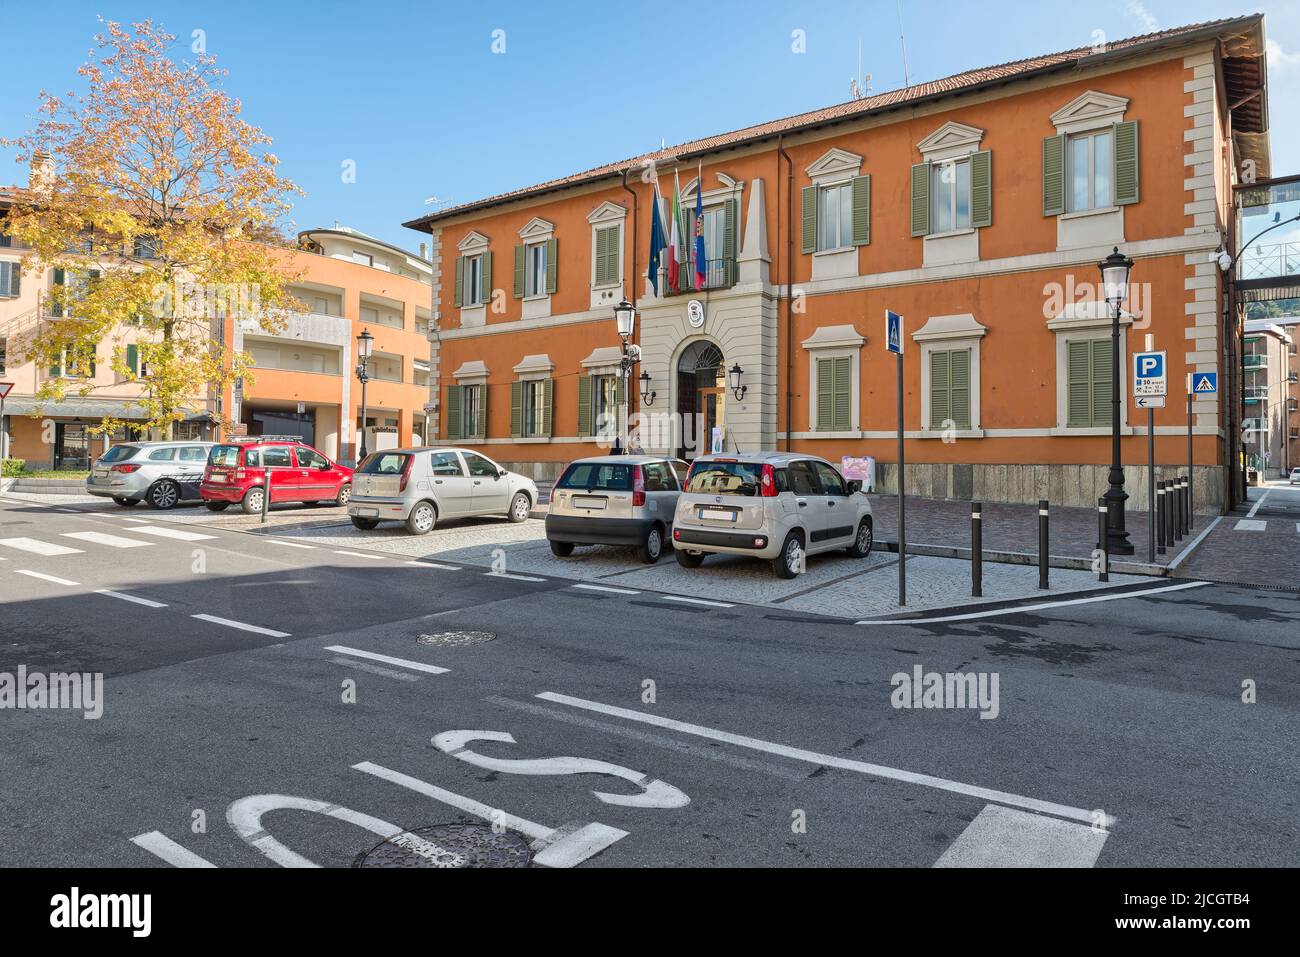 Center of the Oggiono town with the town hall, square Garibaldi. Oggiono is a small town on Lake Annone in northern Italy, province of Lecco Stock Photo